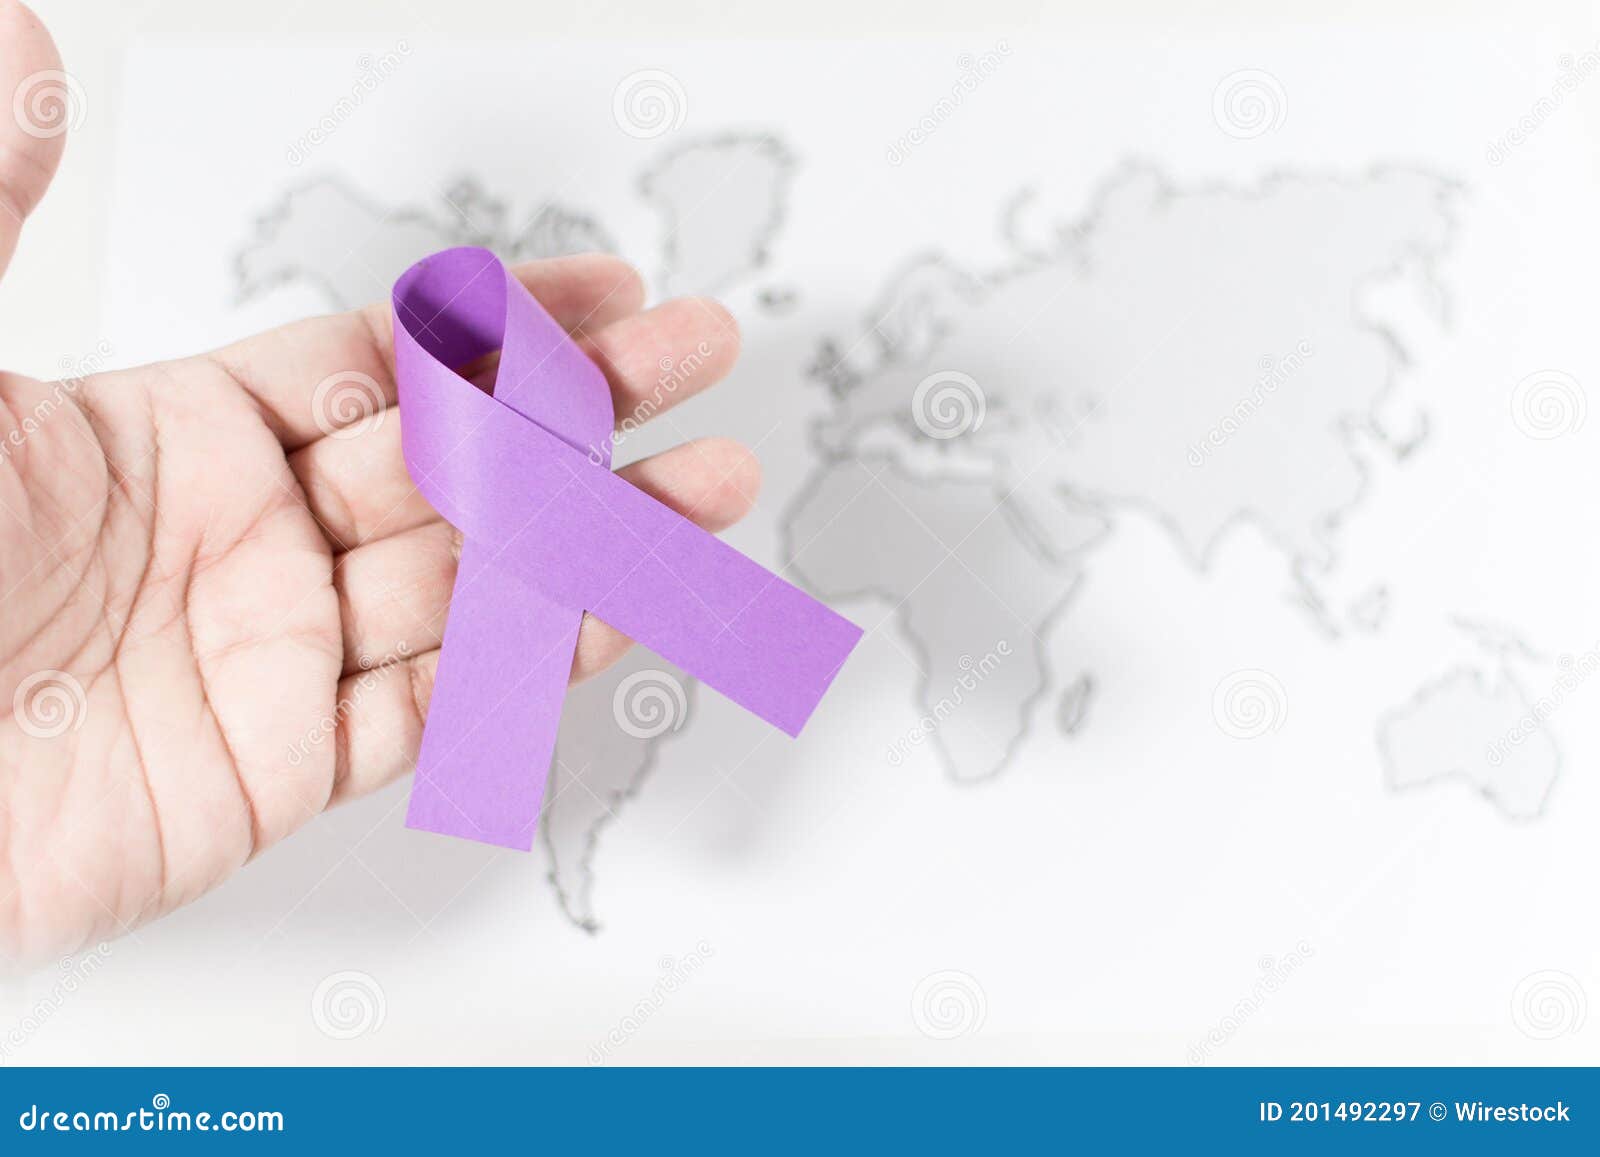 purple ribbon on a person's hand - awareness of violence against women concept